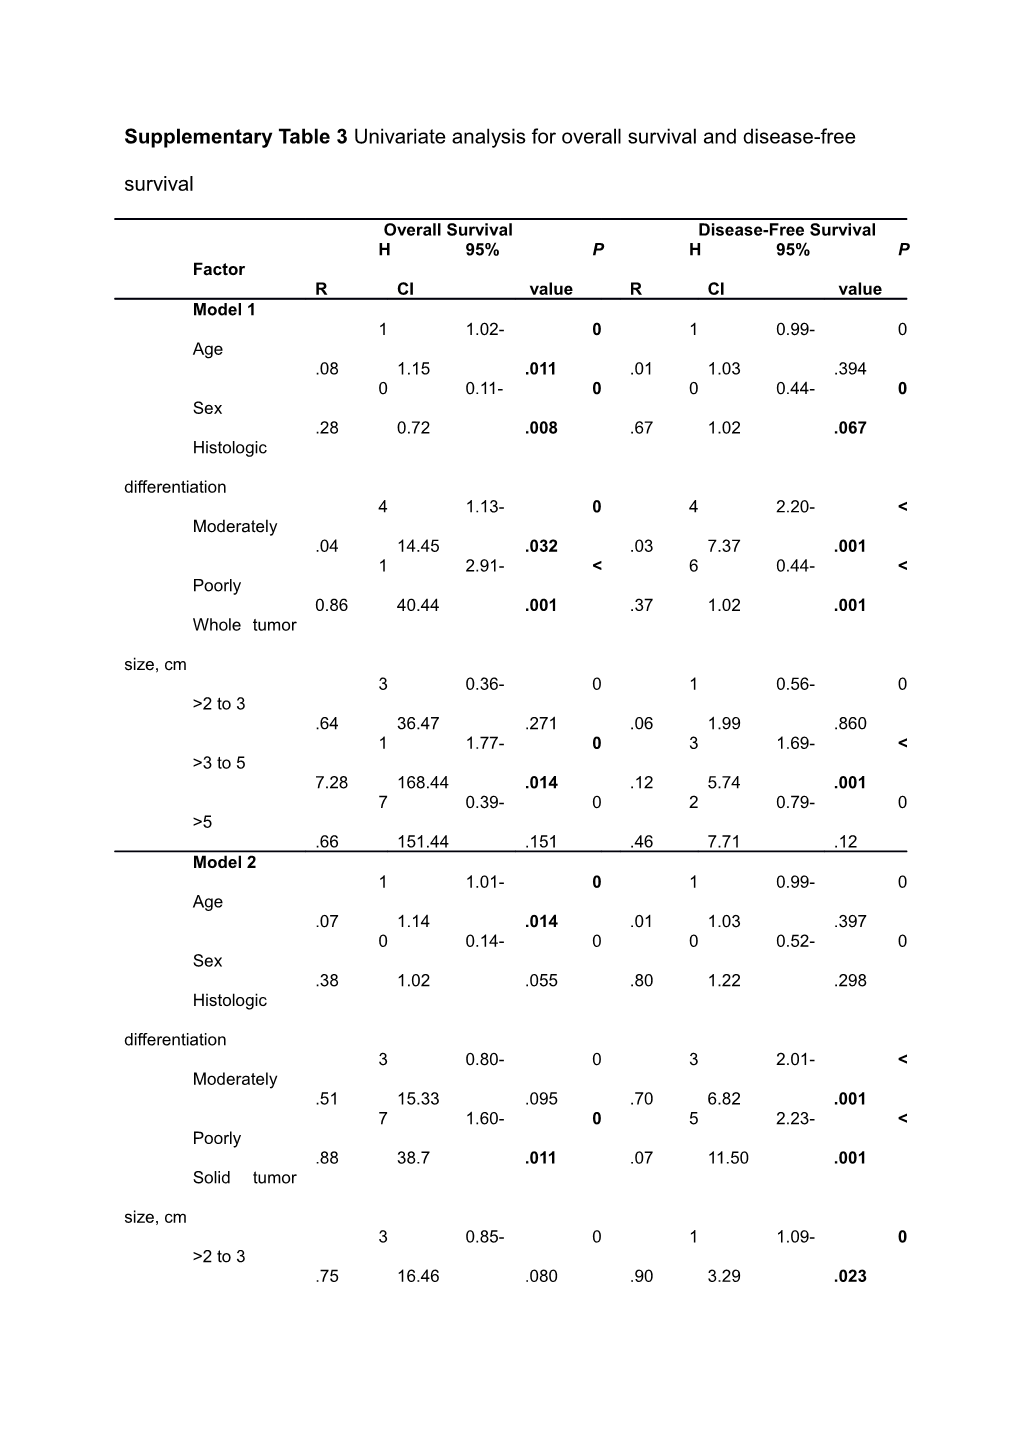 Supplementary Table 3 Univariate Analysis for Overall Survival and Disease-Free Survival